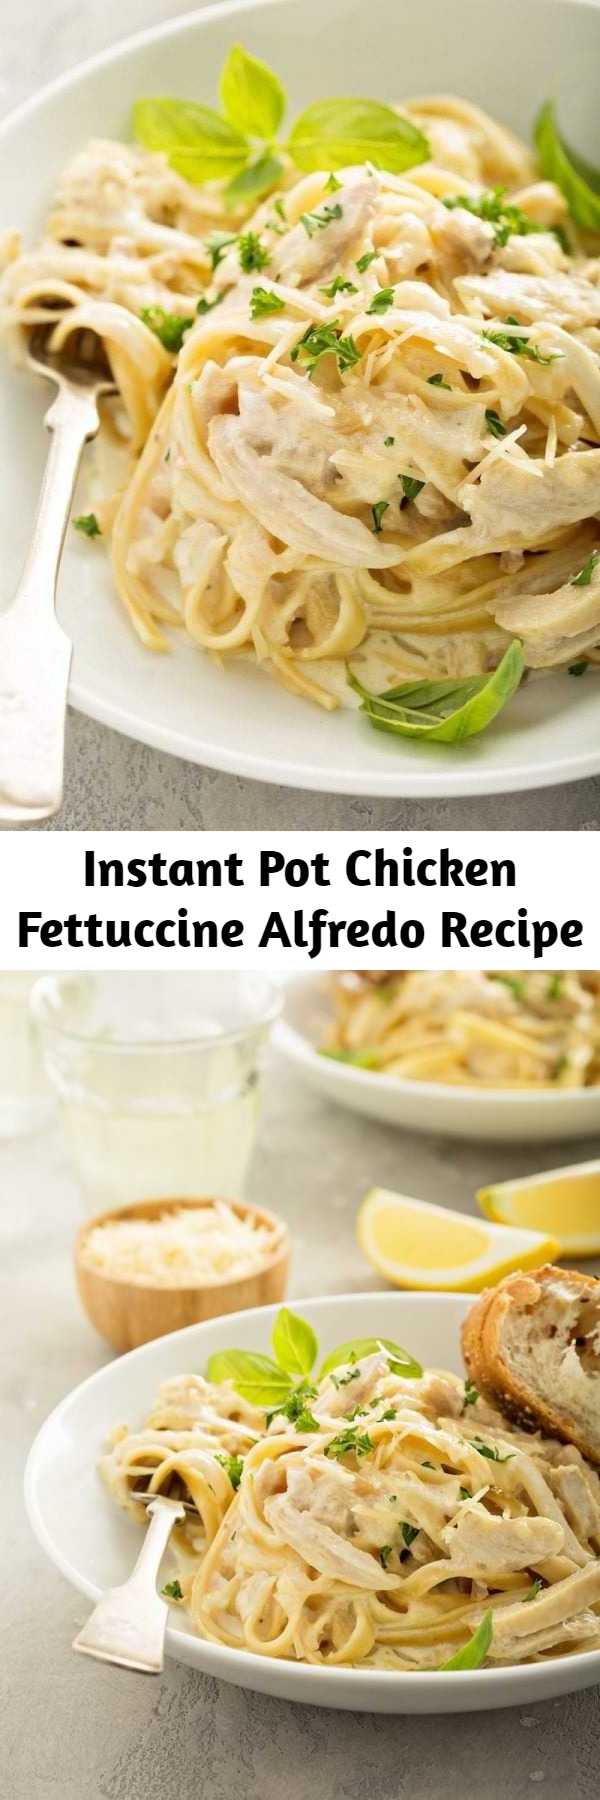 Instant Pot Chicken Fettuccine Alfredo Recipe - When made in the instant pot, this Instant Pot Chicken Fettuccine Alfredo becomes a one pot pasta recipe that couldn't be any easier or more delicious! #InstantPot #OnePot #Pasta